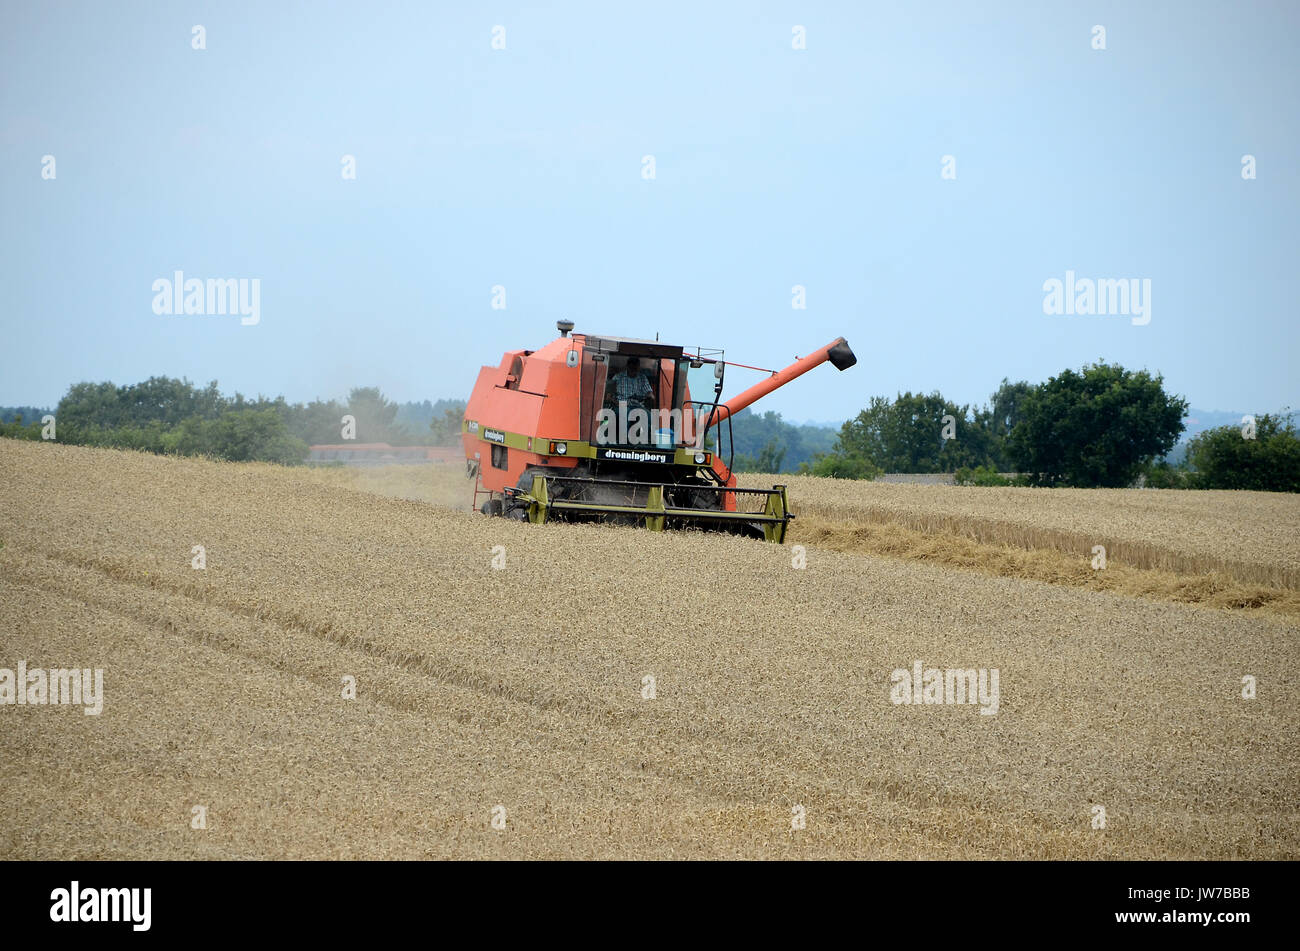 Klinting, Denmark - August 8, 2017: Harvest work with combine harvester in a wheat field. Stock Photo